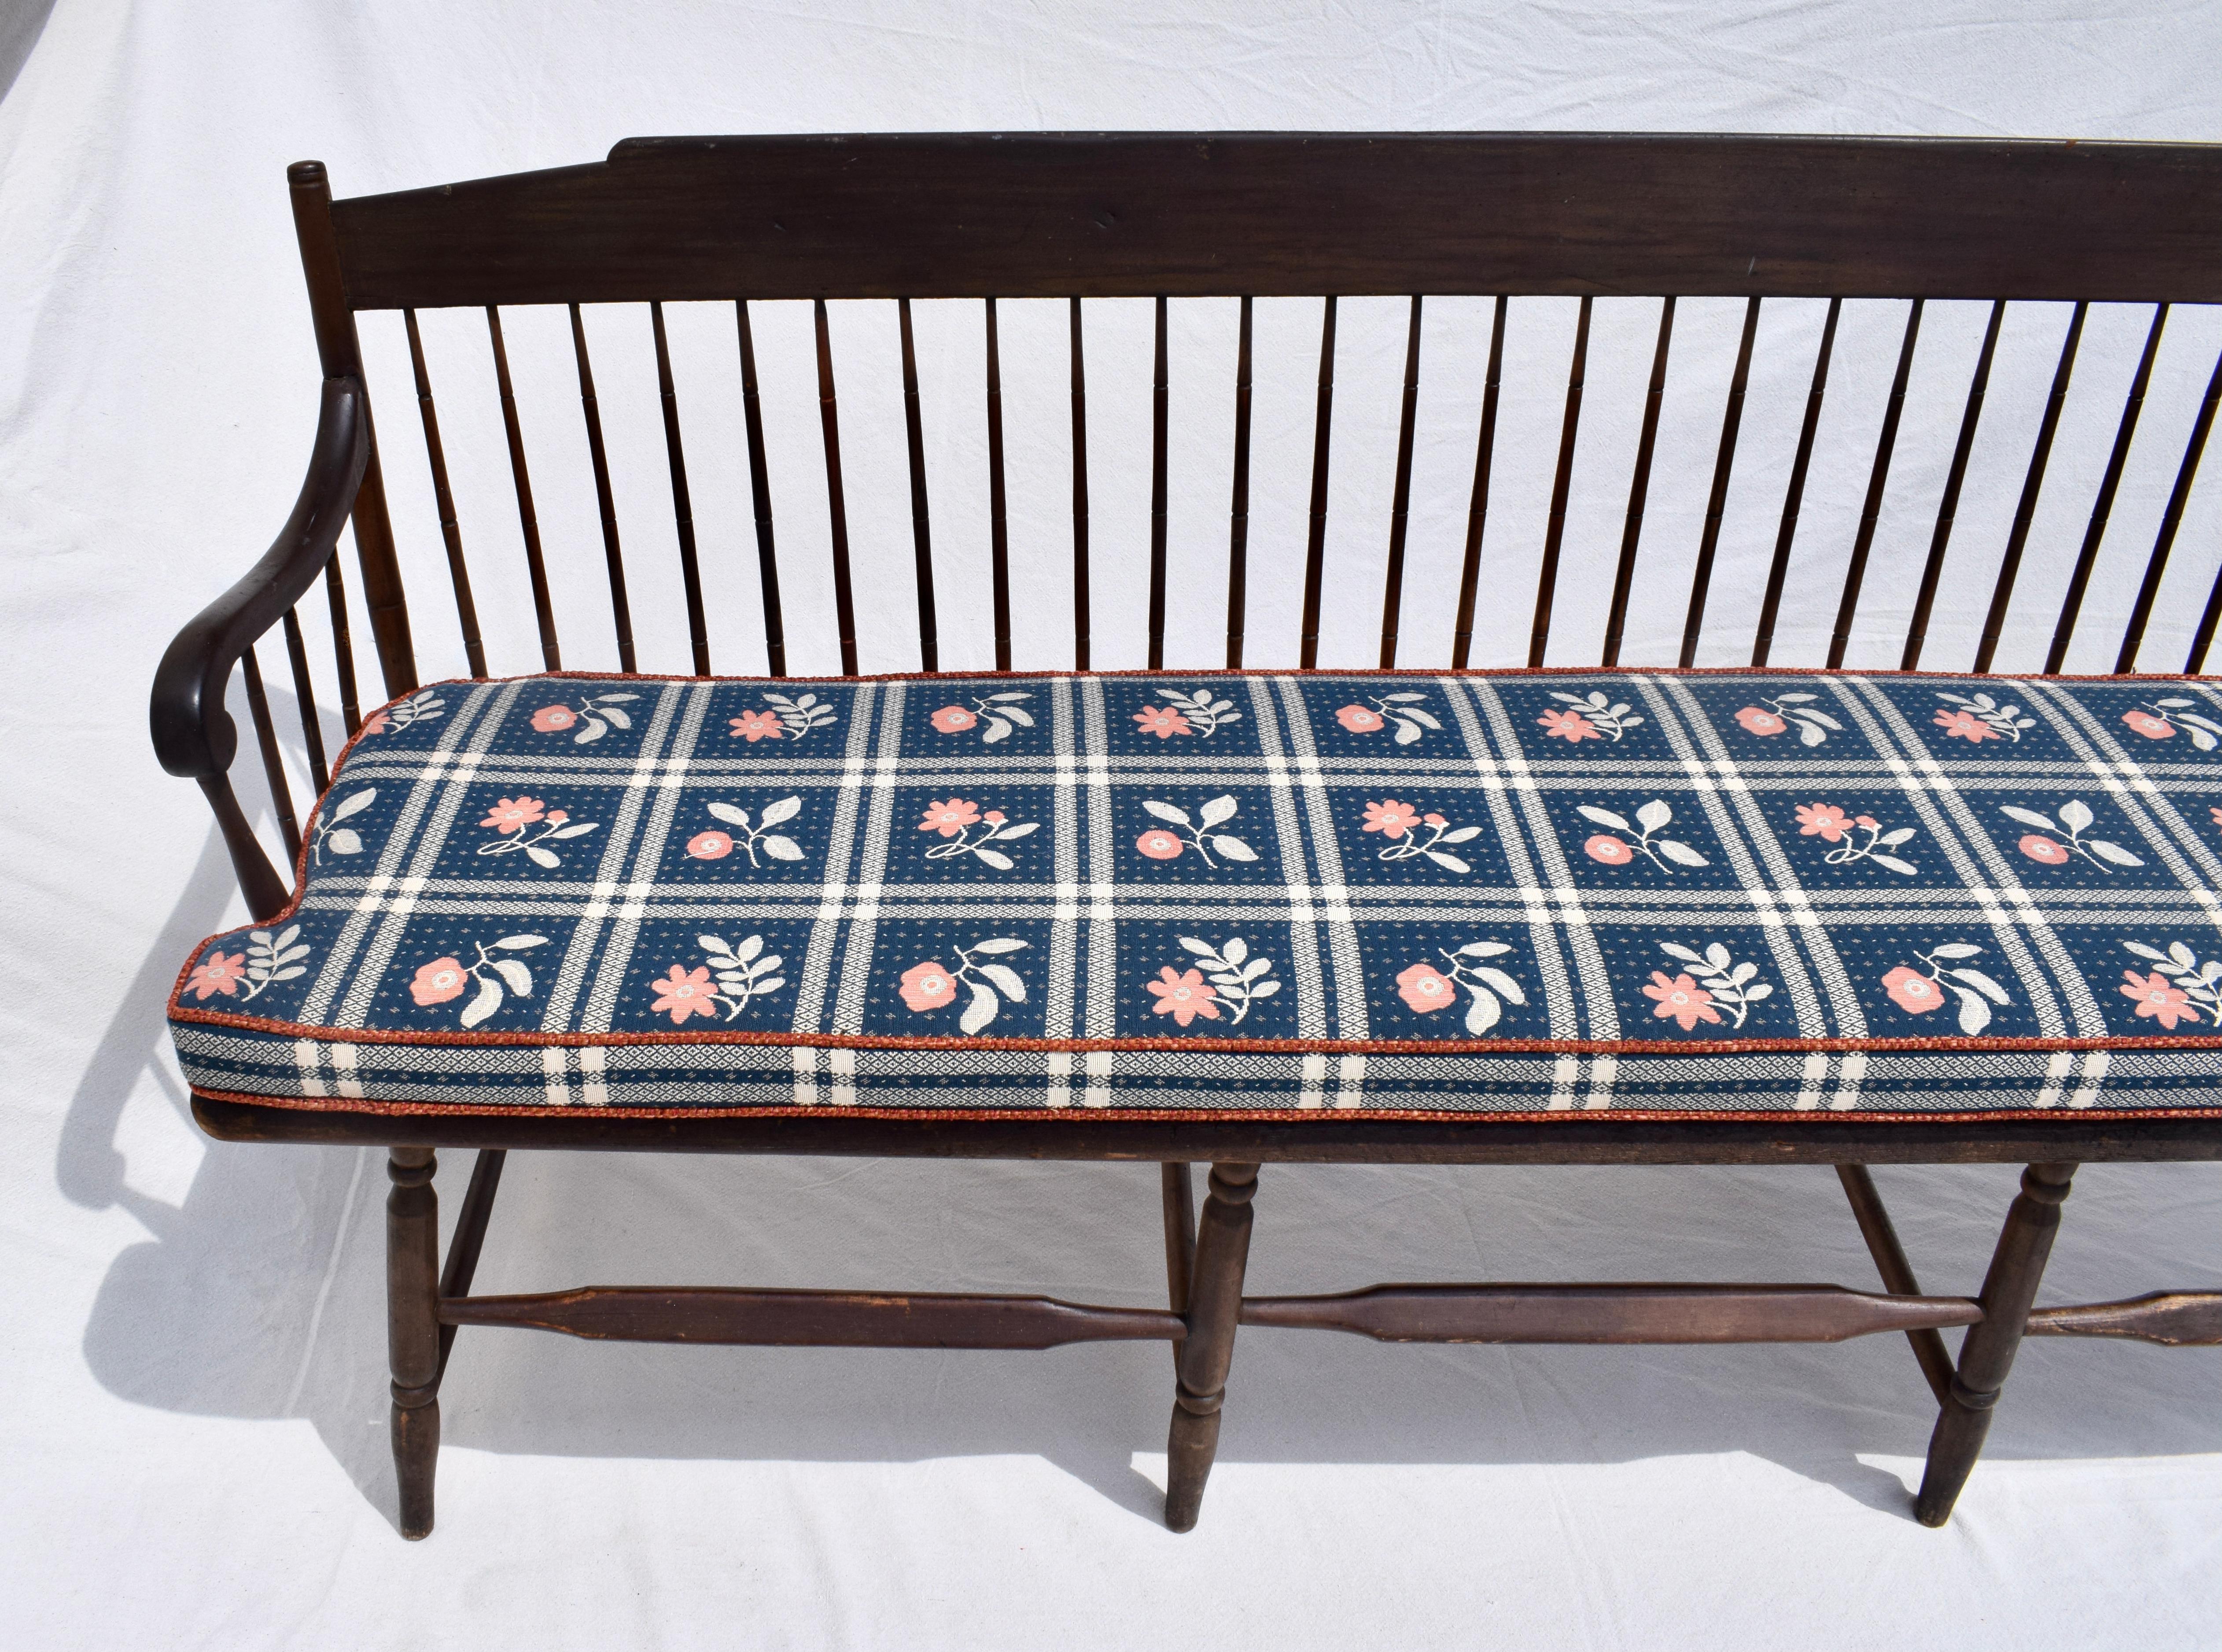 American Classical American Windsor Bench Early 19th C.